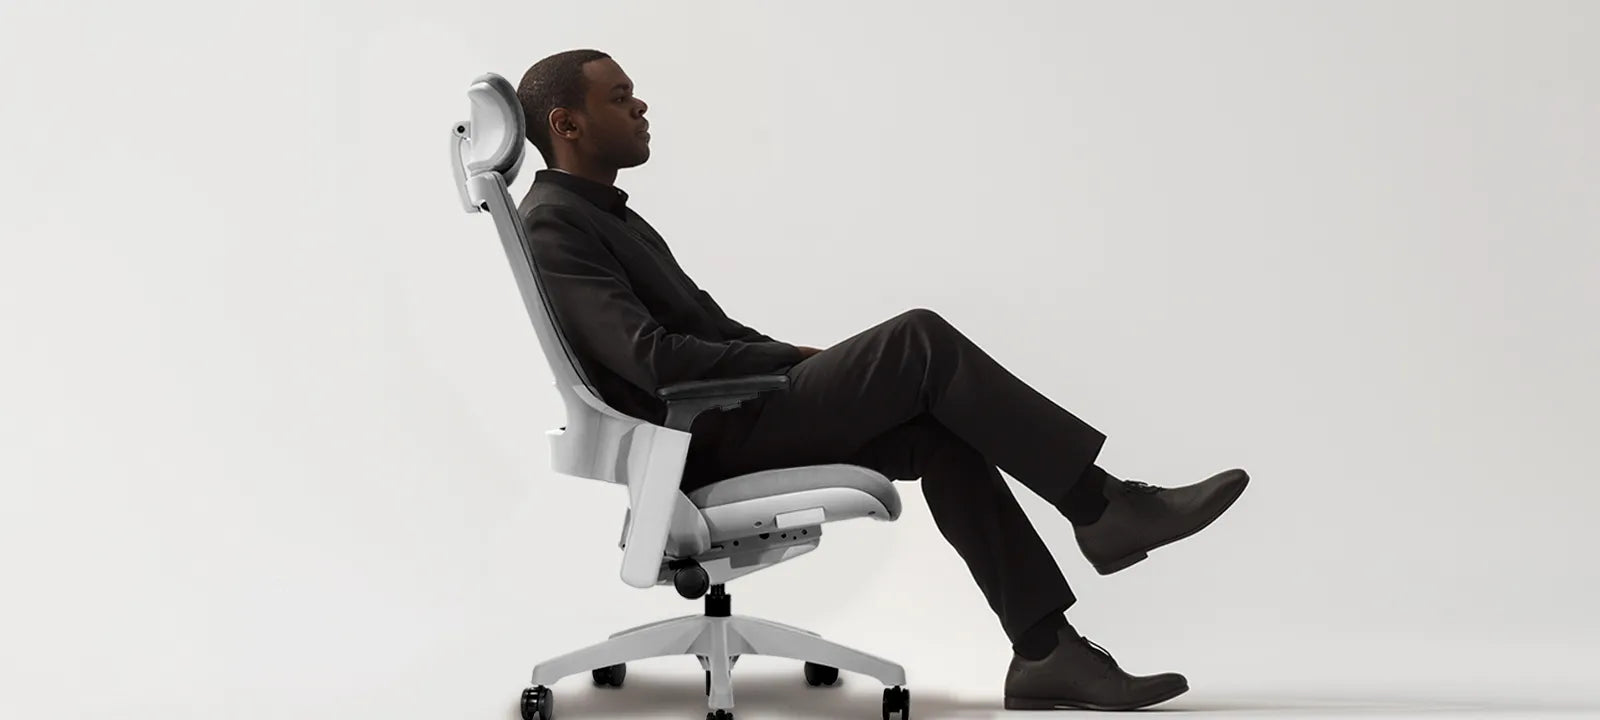 Flujo Angulo Chair showcased with a man seated in comfort, emphasizing the sleek white design and ergonomic back support.